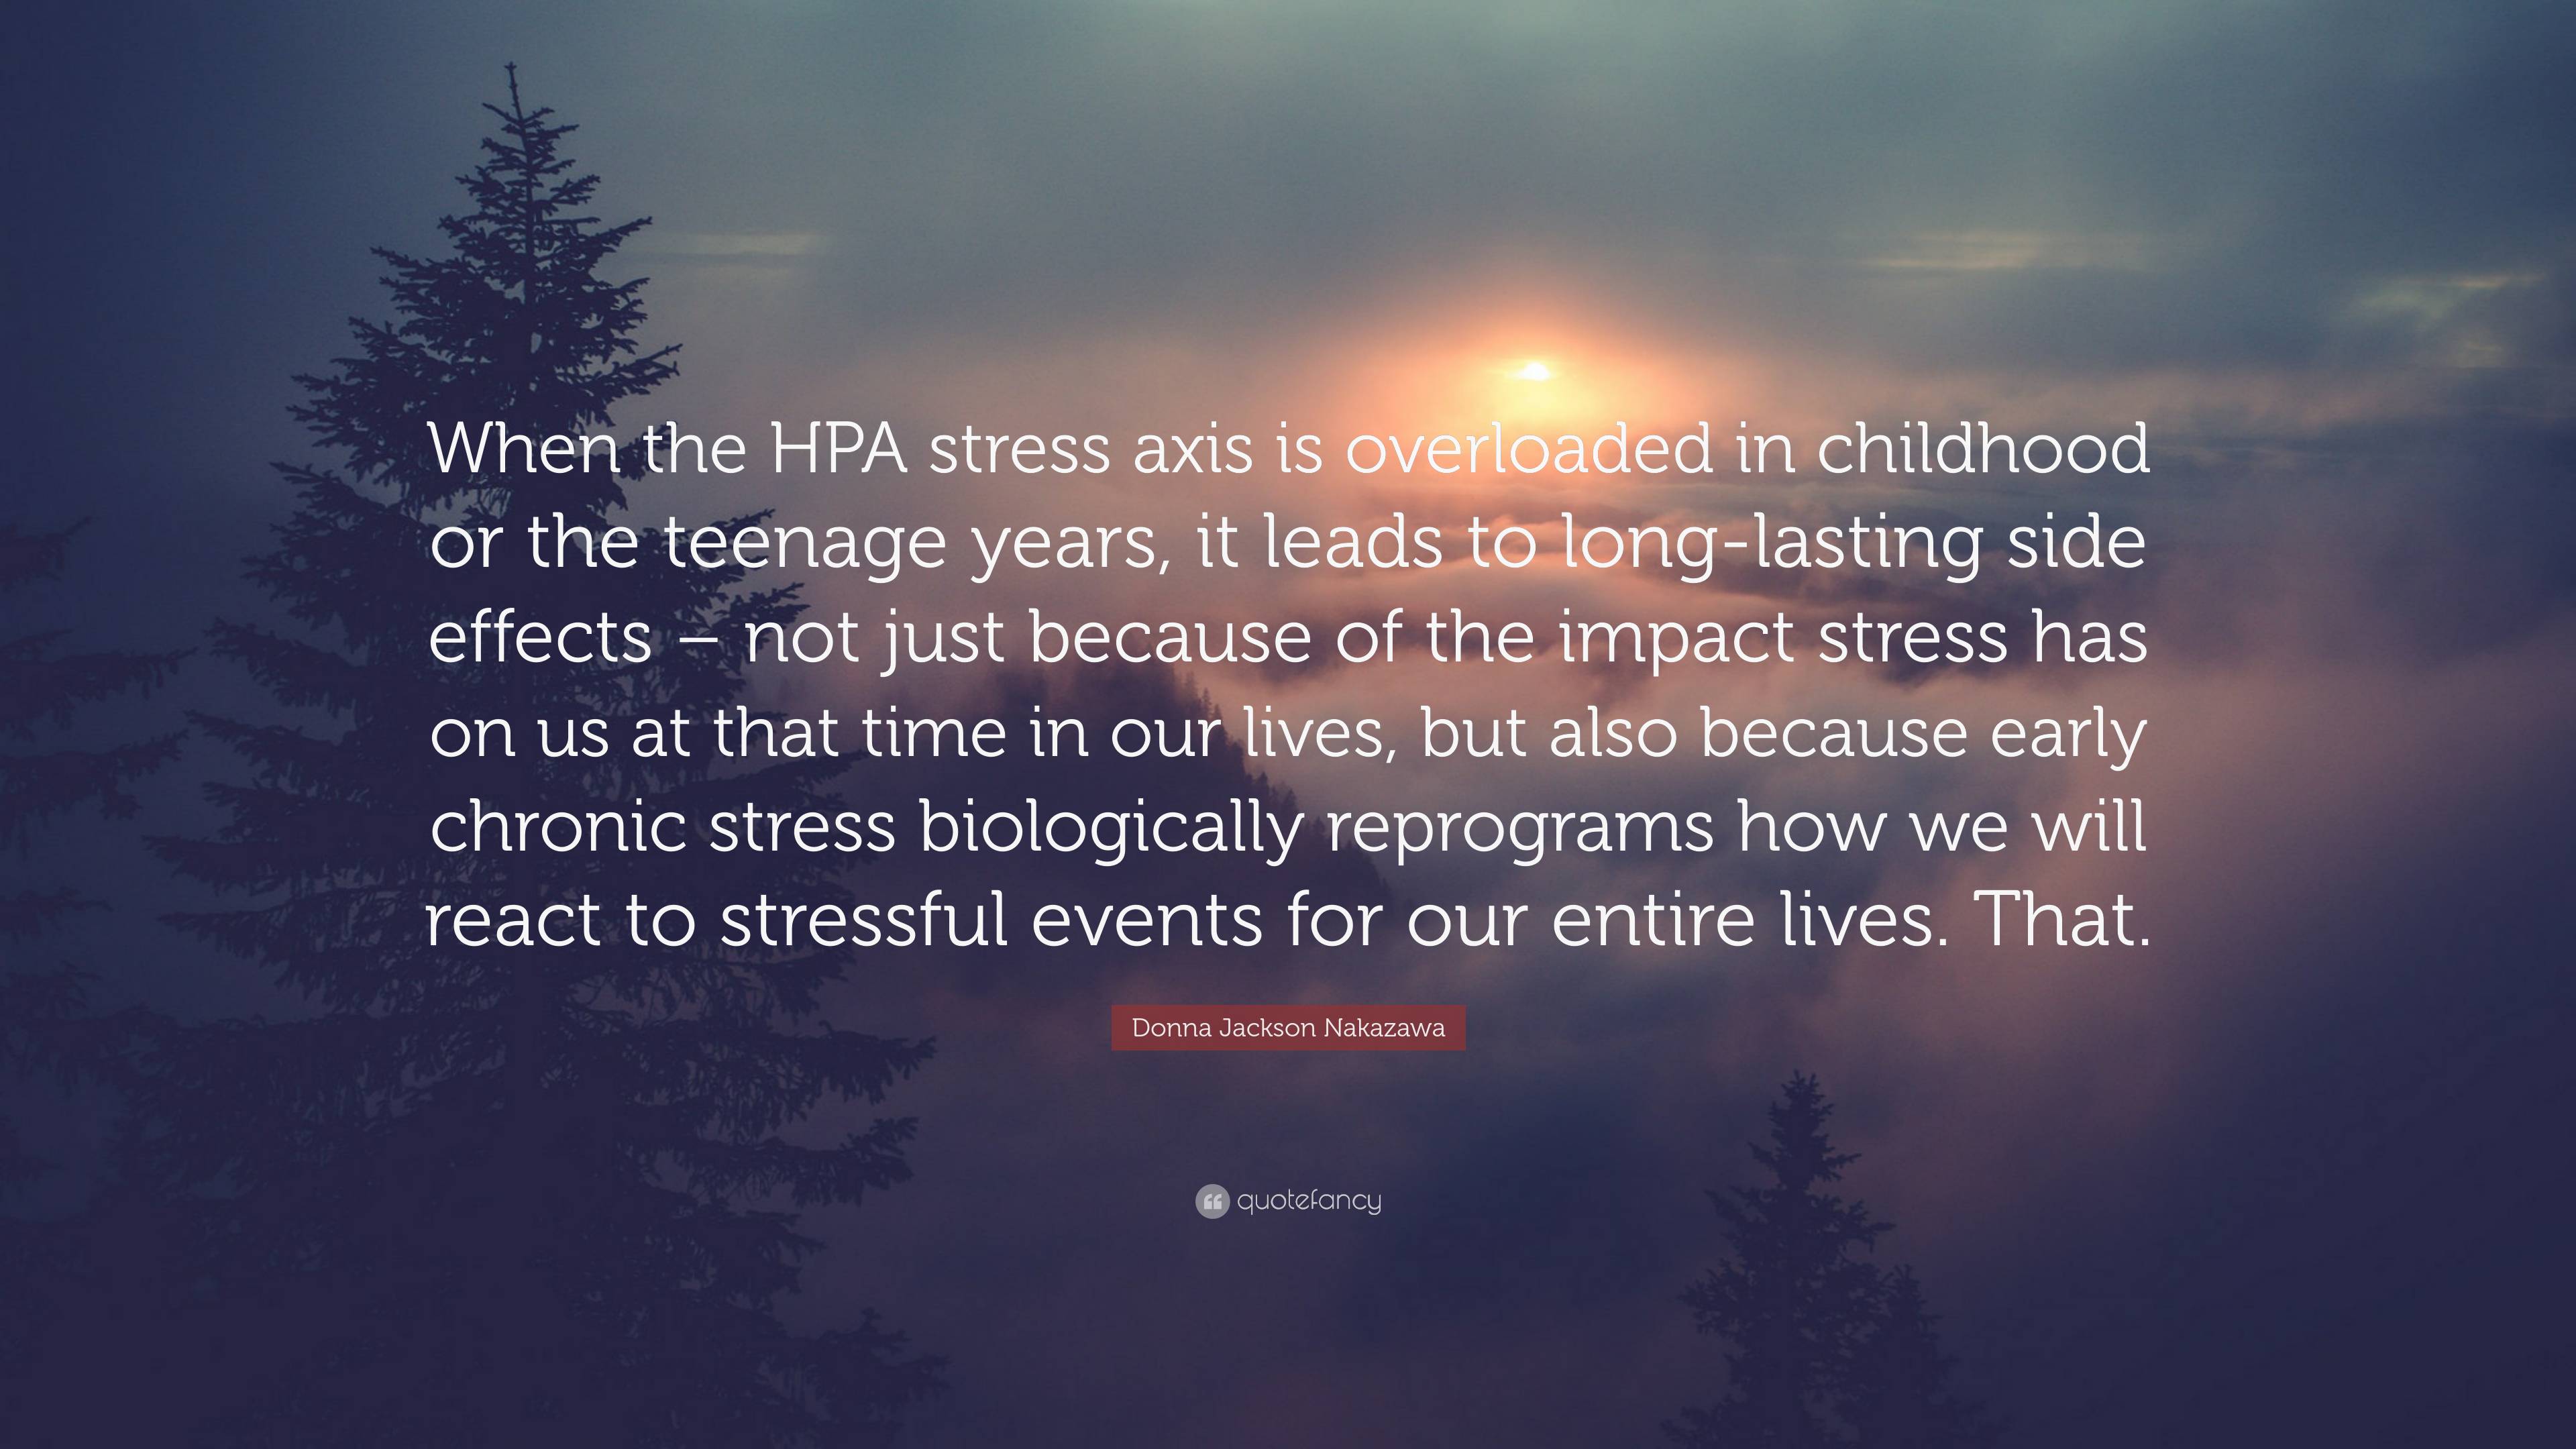 Donna Jackson Nakazawa Quote: “When the HPA stress axis is overloaded in  childhood or the teenage years, it leads to long-lasting side effects – not  ju”